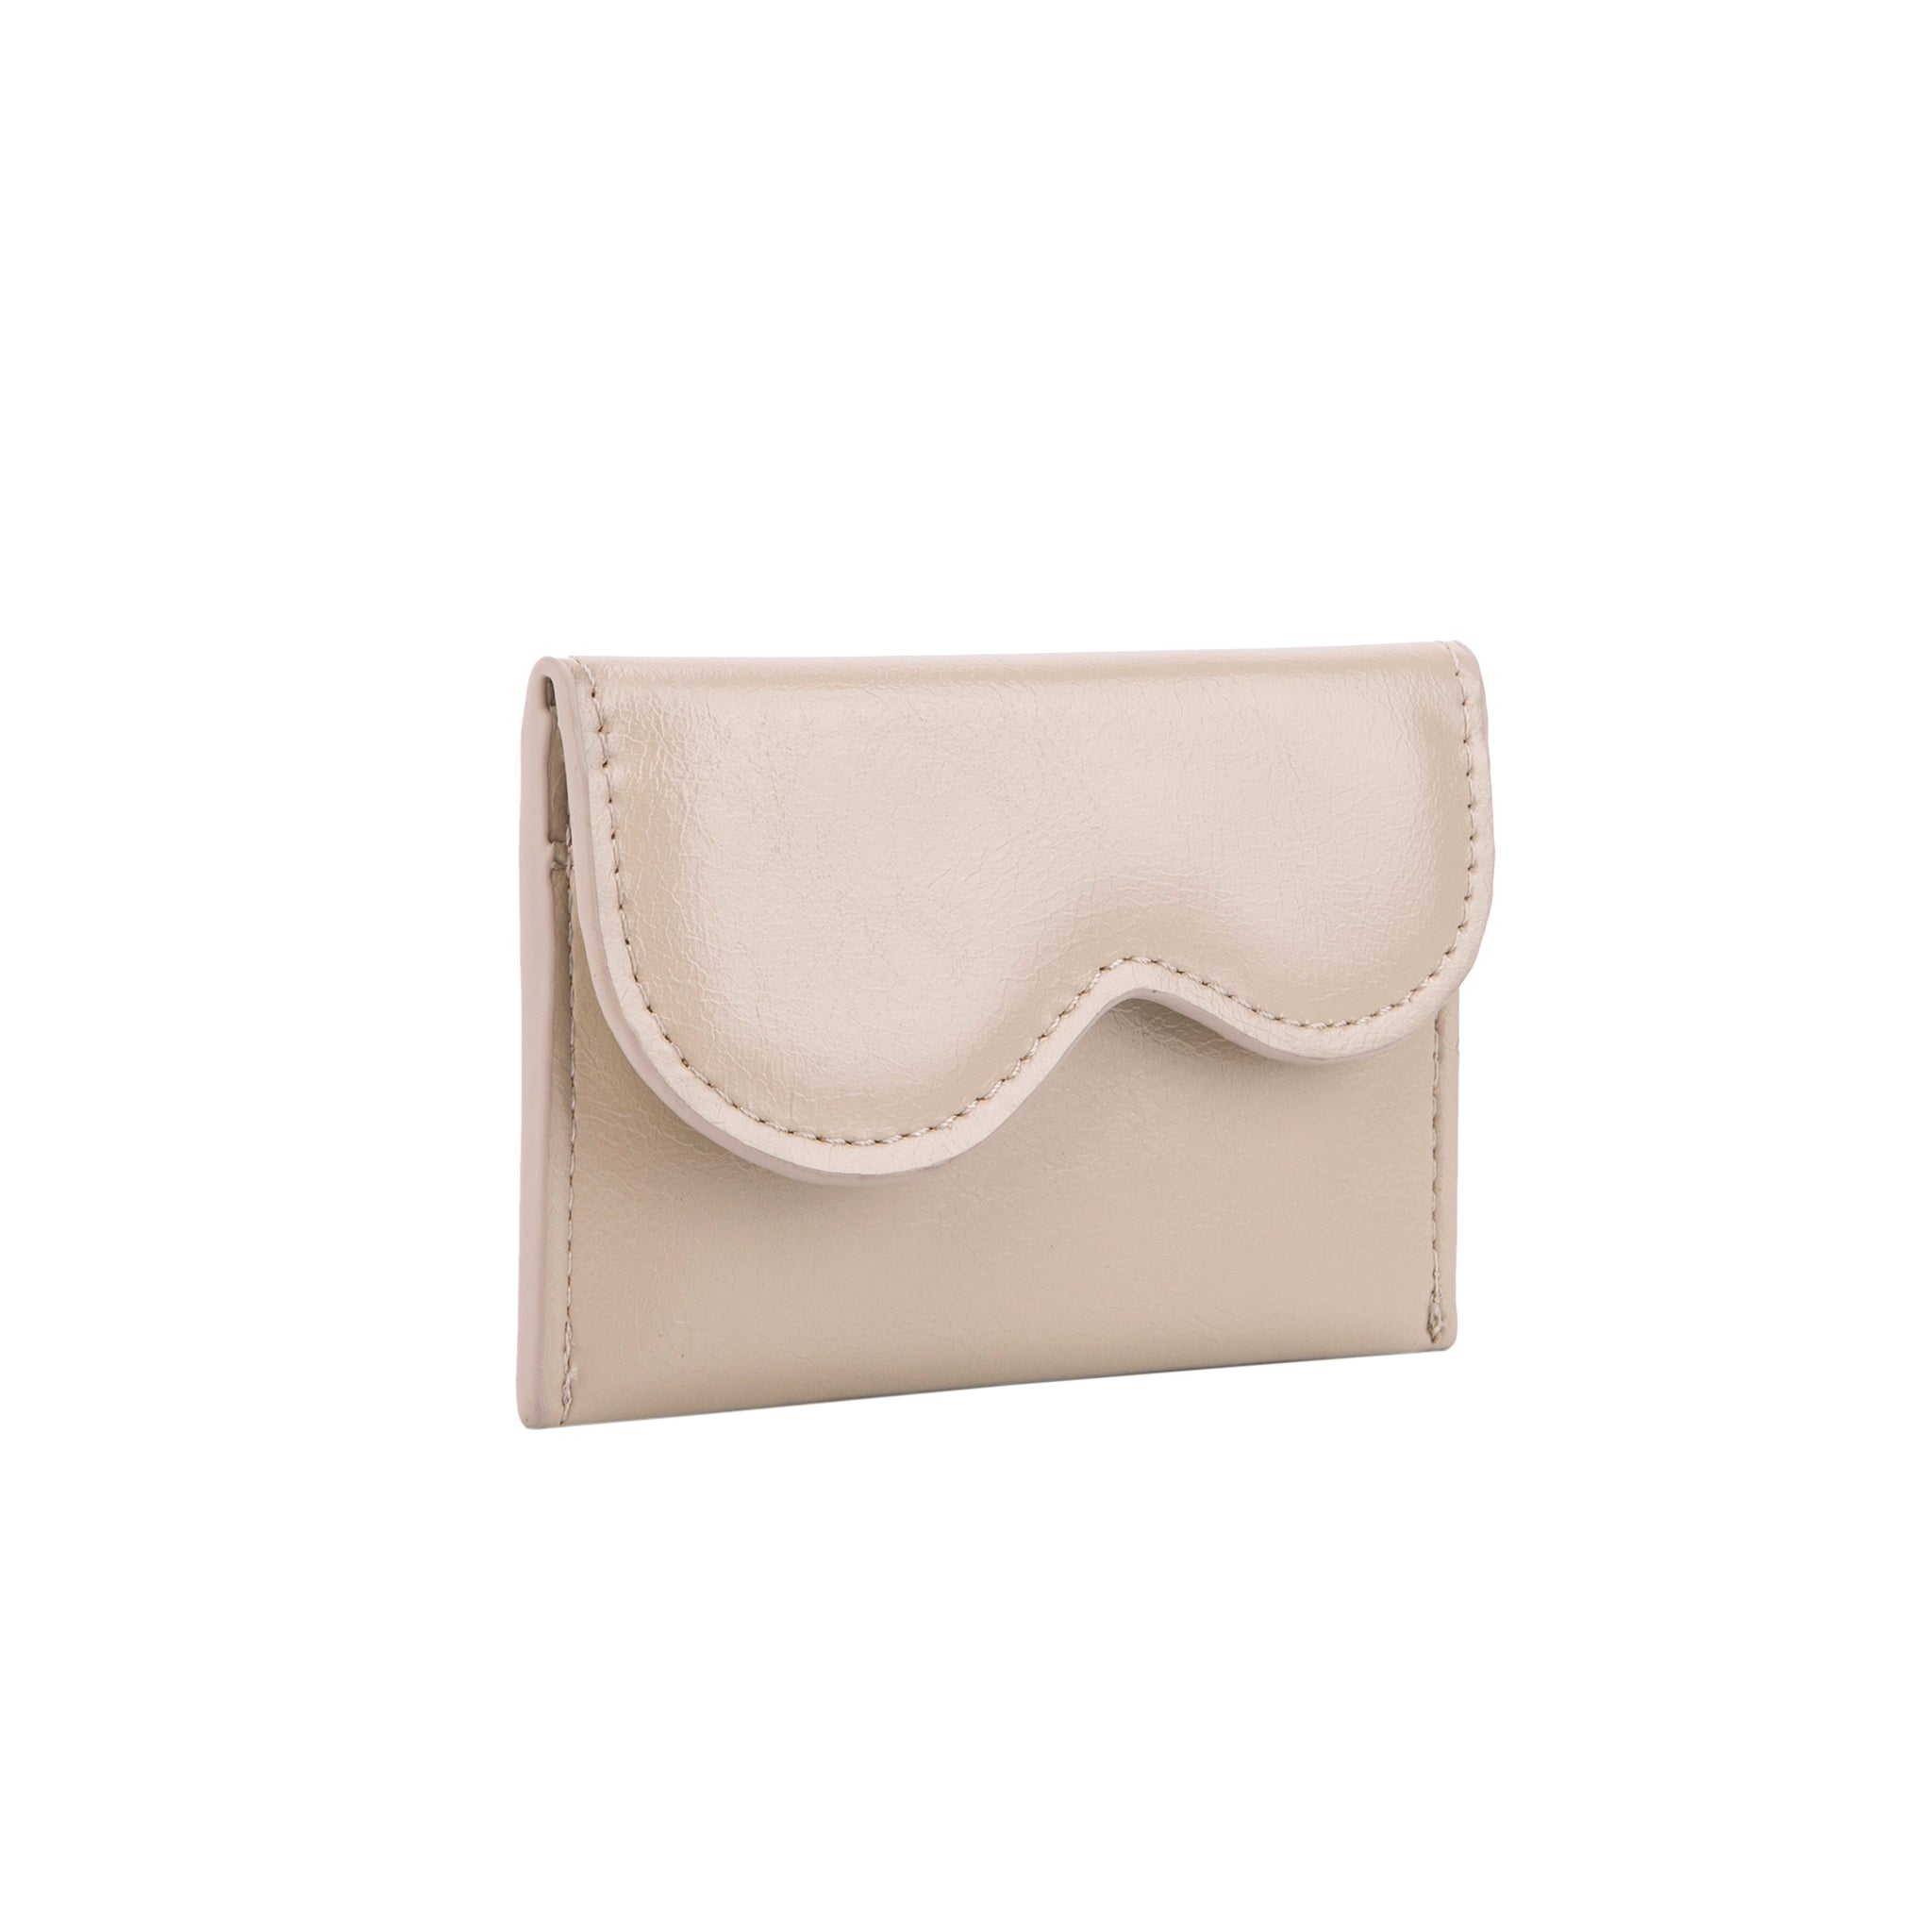 WALLET WAVE SOFT STRUCTURE - LIGHT NUDE